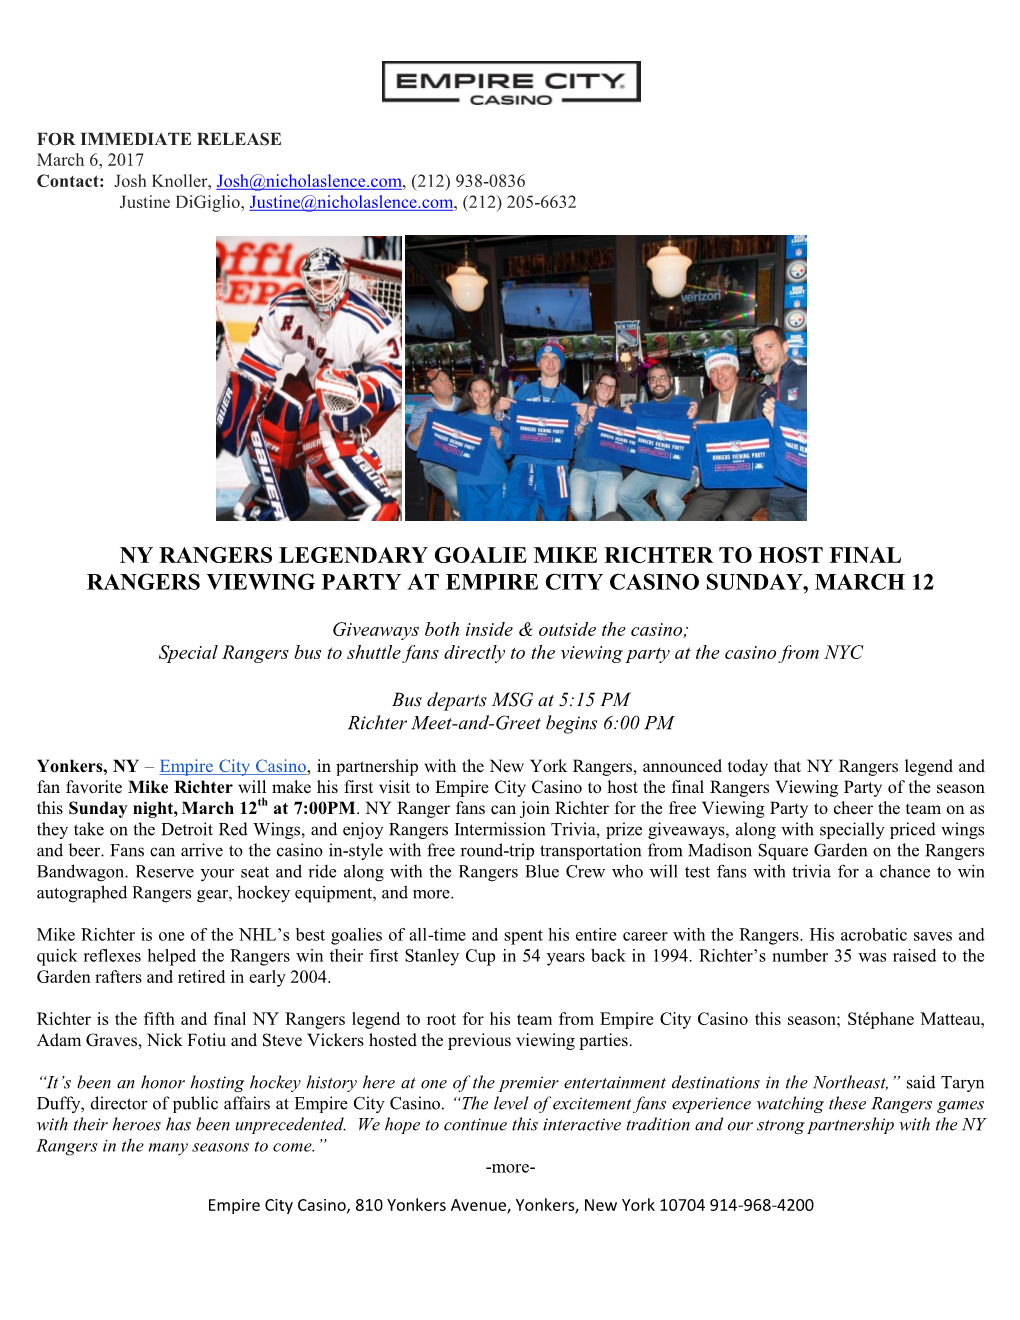 Ny Rangers Legendary Goalie Mike Richter to Host Final Rangers Viewing Party at Empire City Casino Sunday, March 12